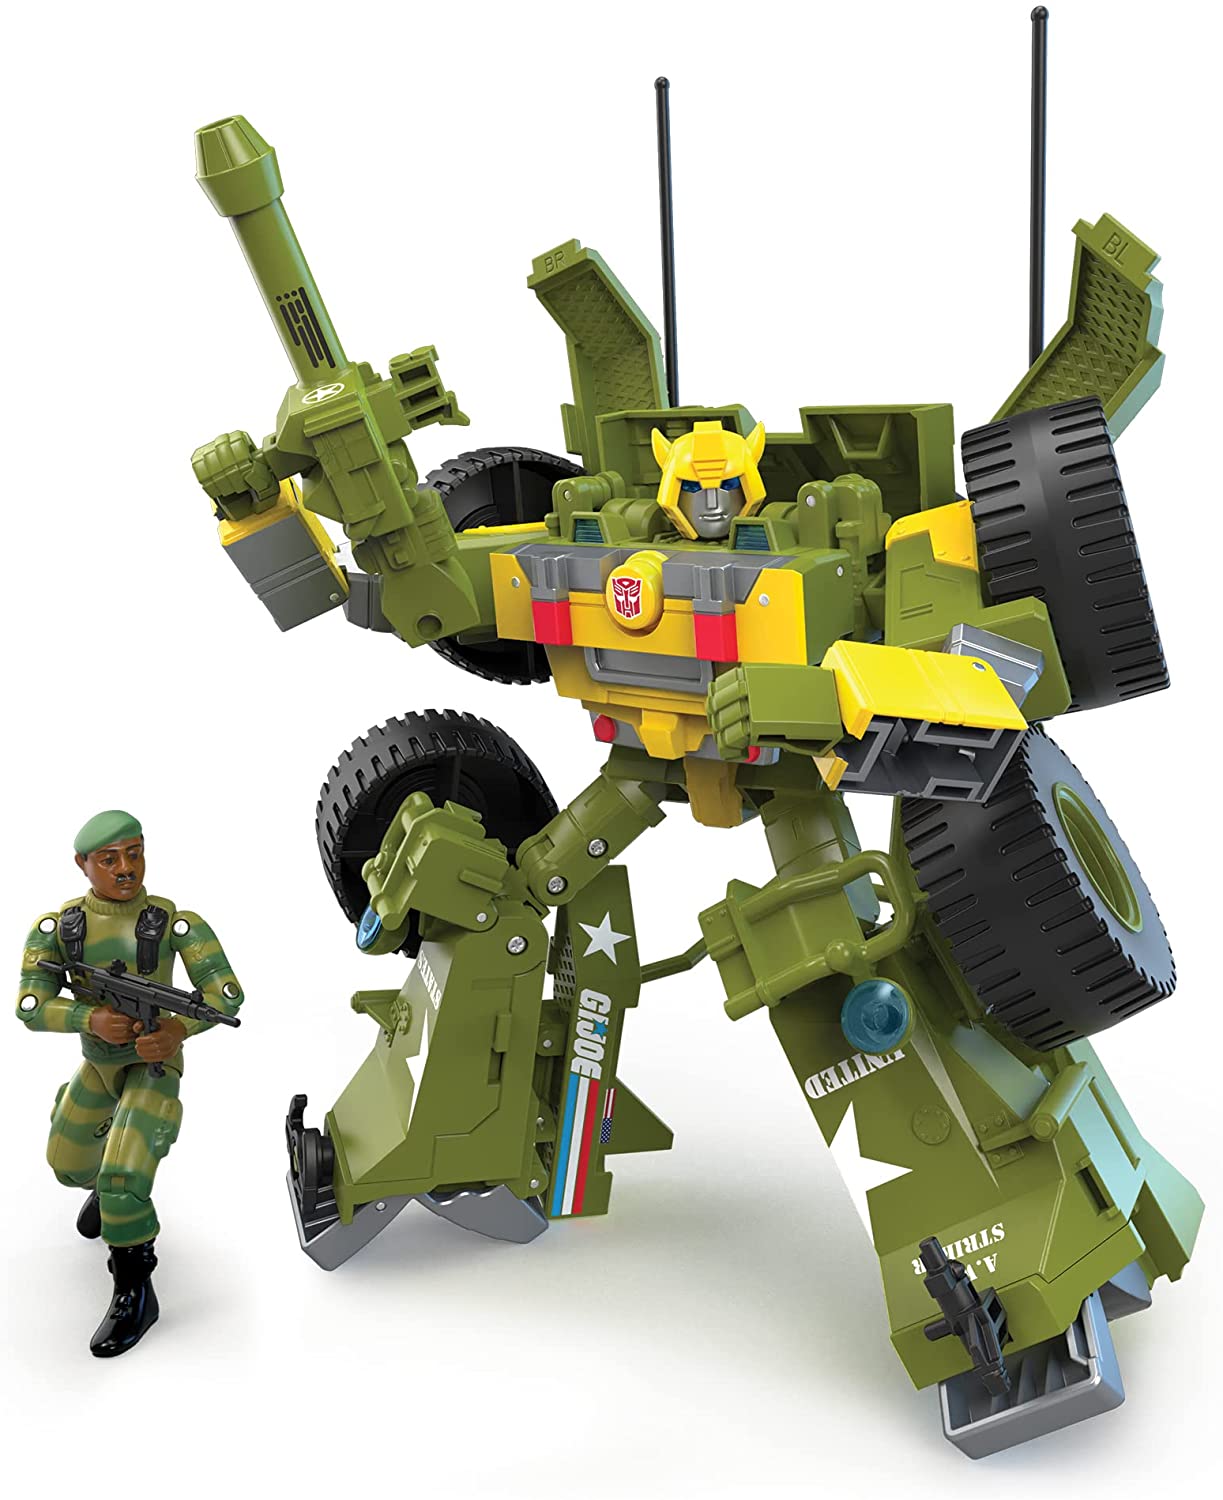 Hasbro Reveals New Gi Joe Action Figures And Pre Orders During Fanstream 0576